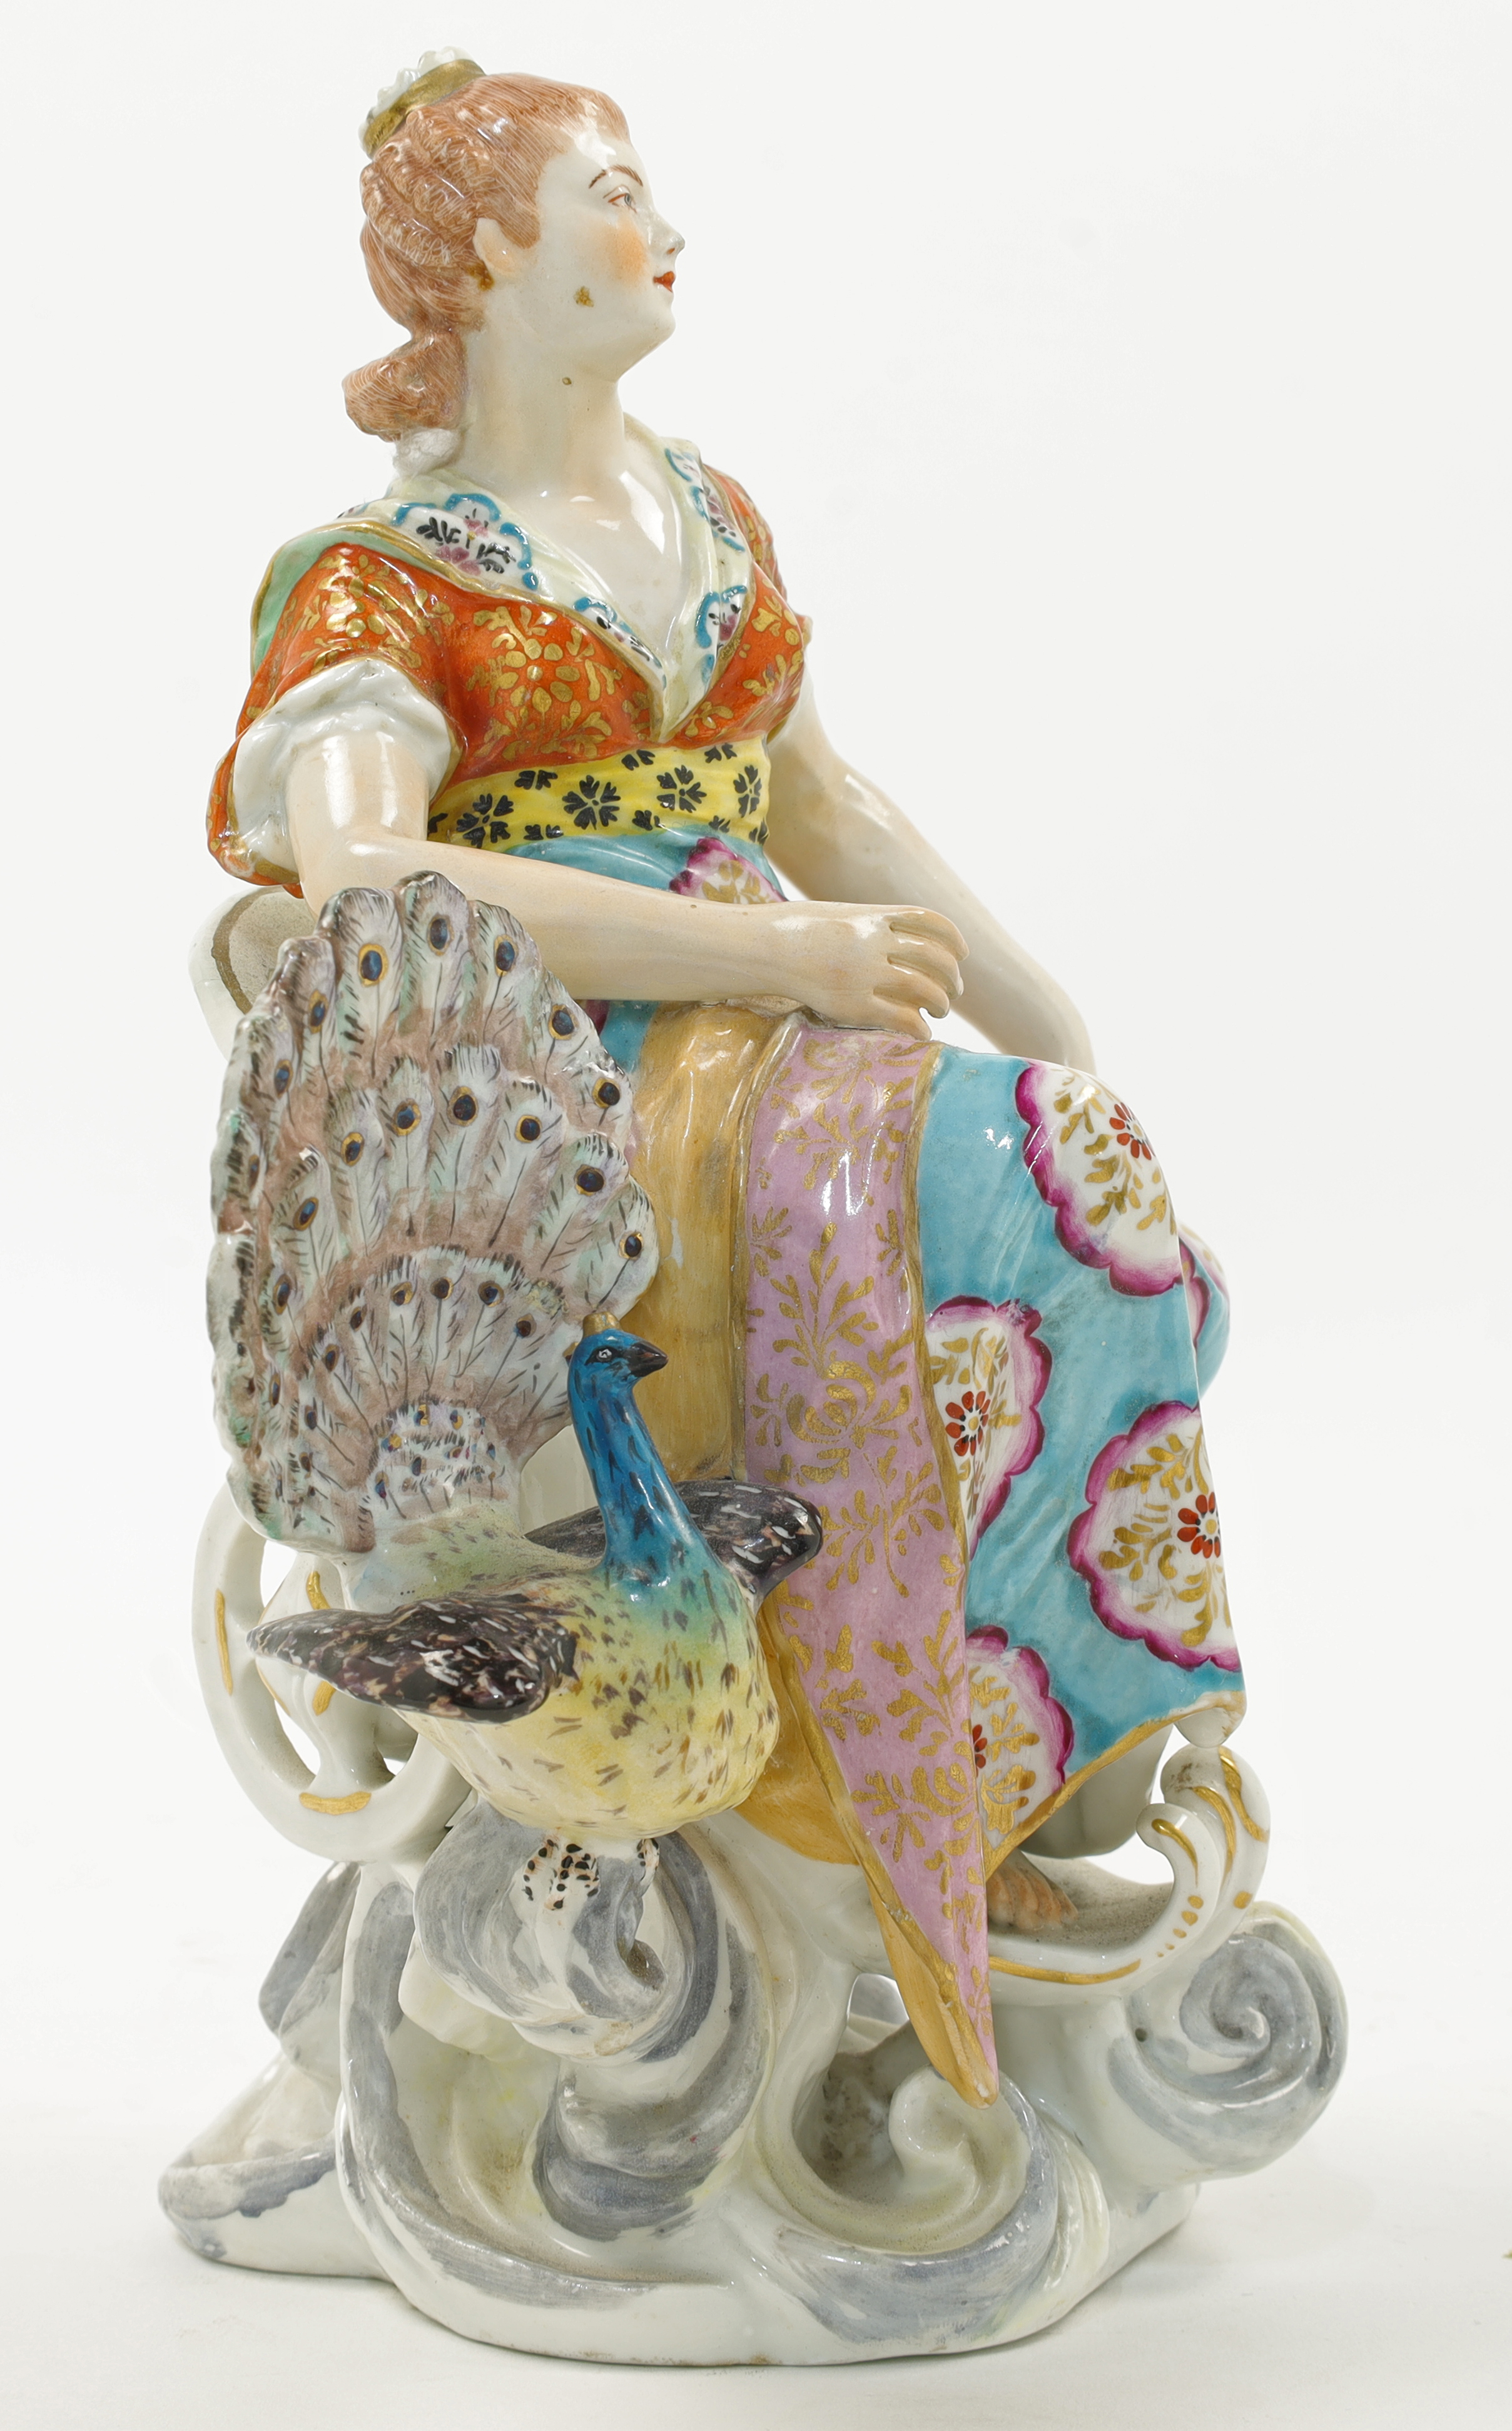 A Paris (Samson) Chelsea style porcelain figure of Juno and a peacock, second half 19th century, ... - Image 2 of 2